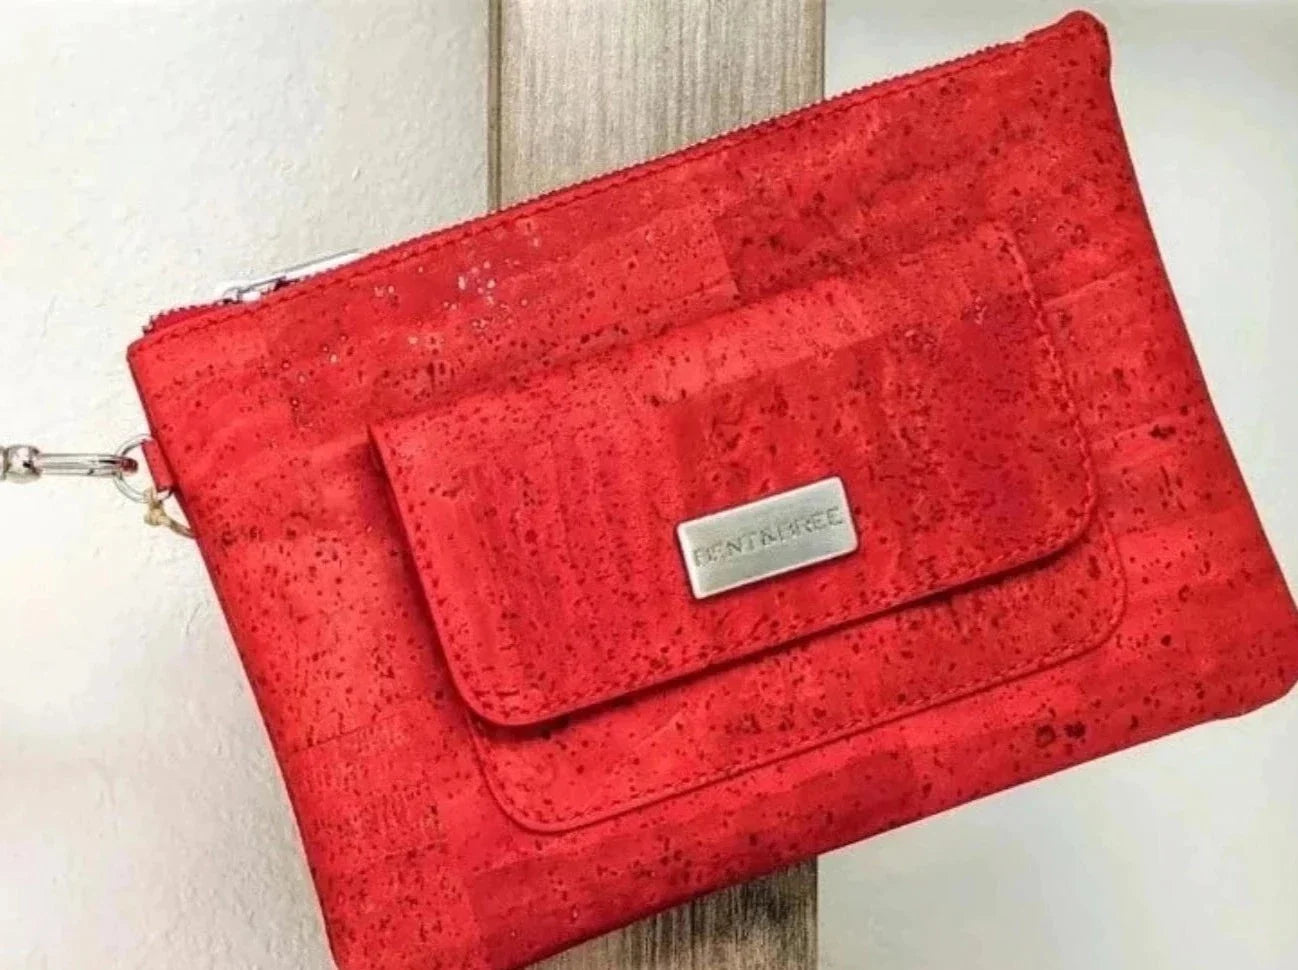 Bent and Bree Cork Clutch in Red with Removable Strap, front pocket and zip top closure